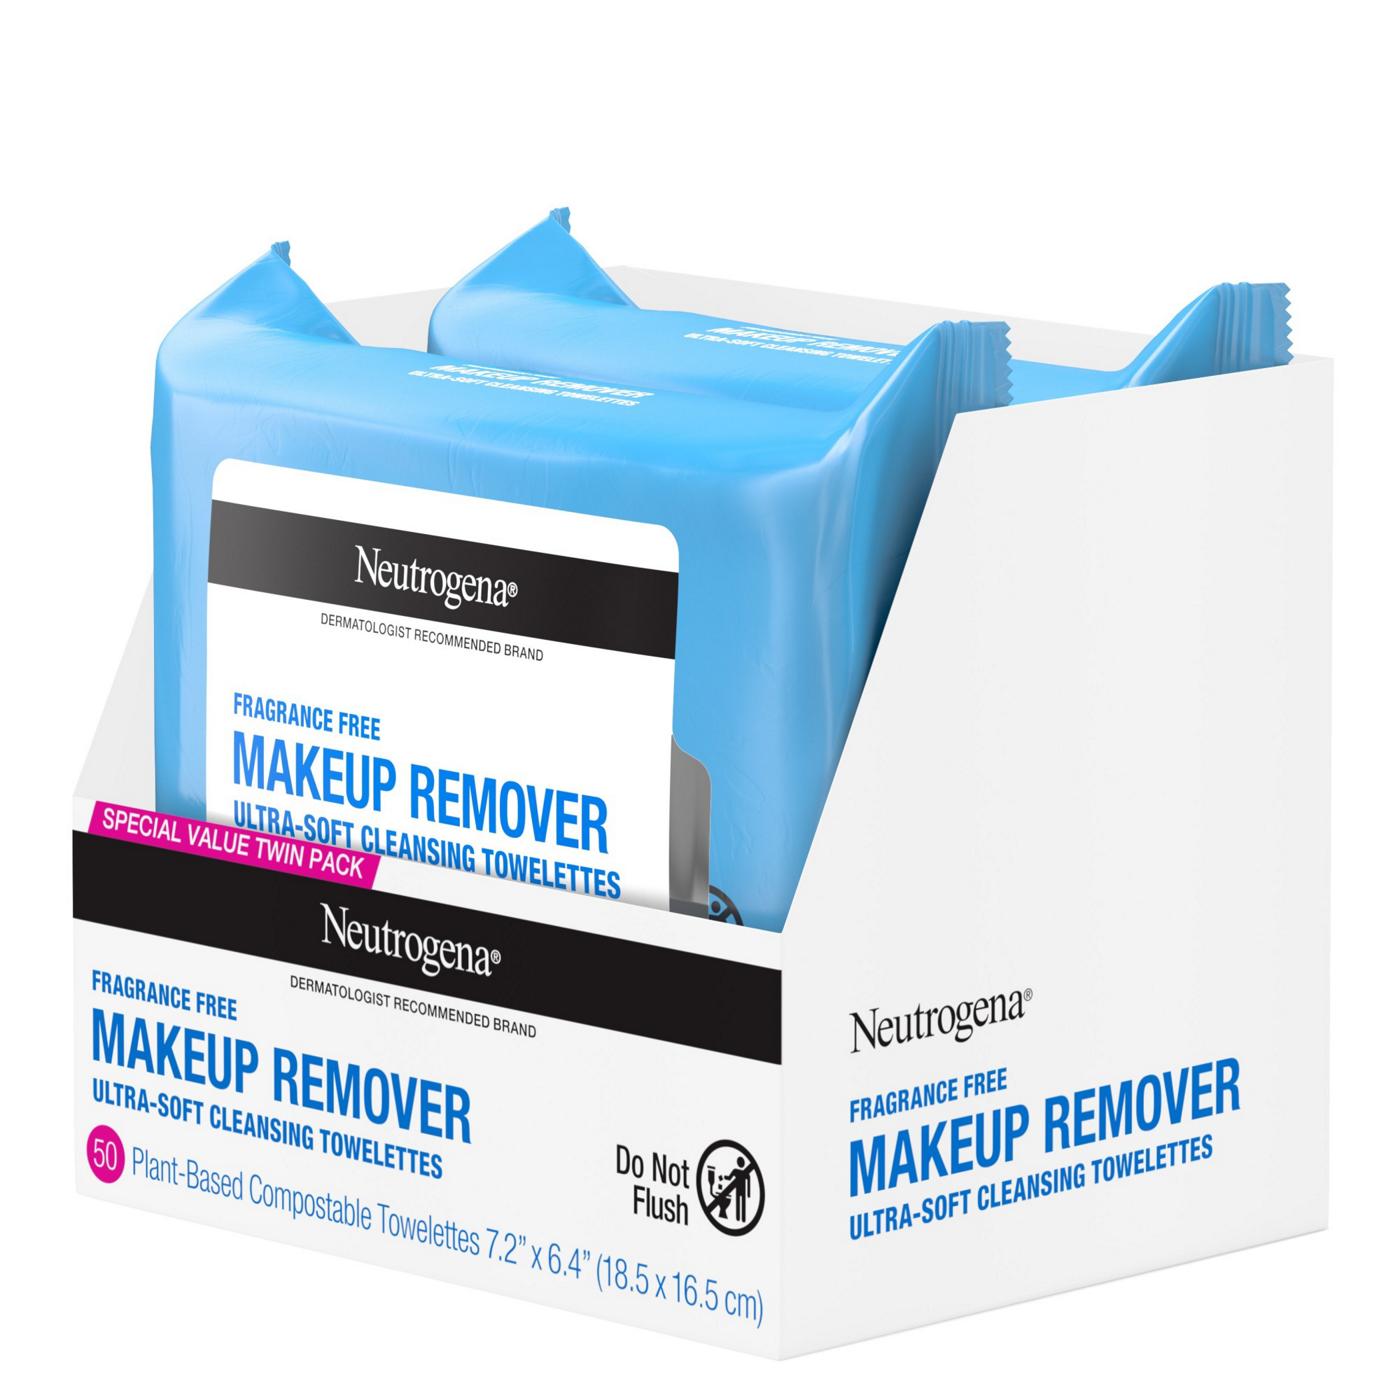 Neutrogena Makeup Remover Fragrance Free Cleansing Towelettes - Twin Pack; image 2 of 8